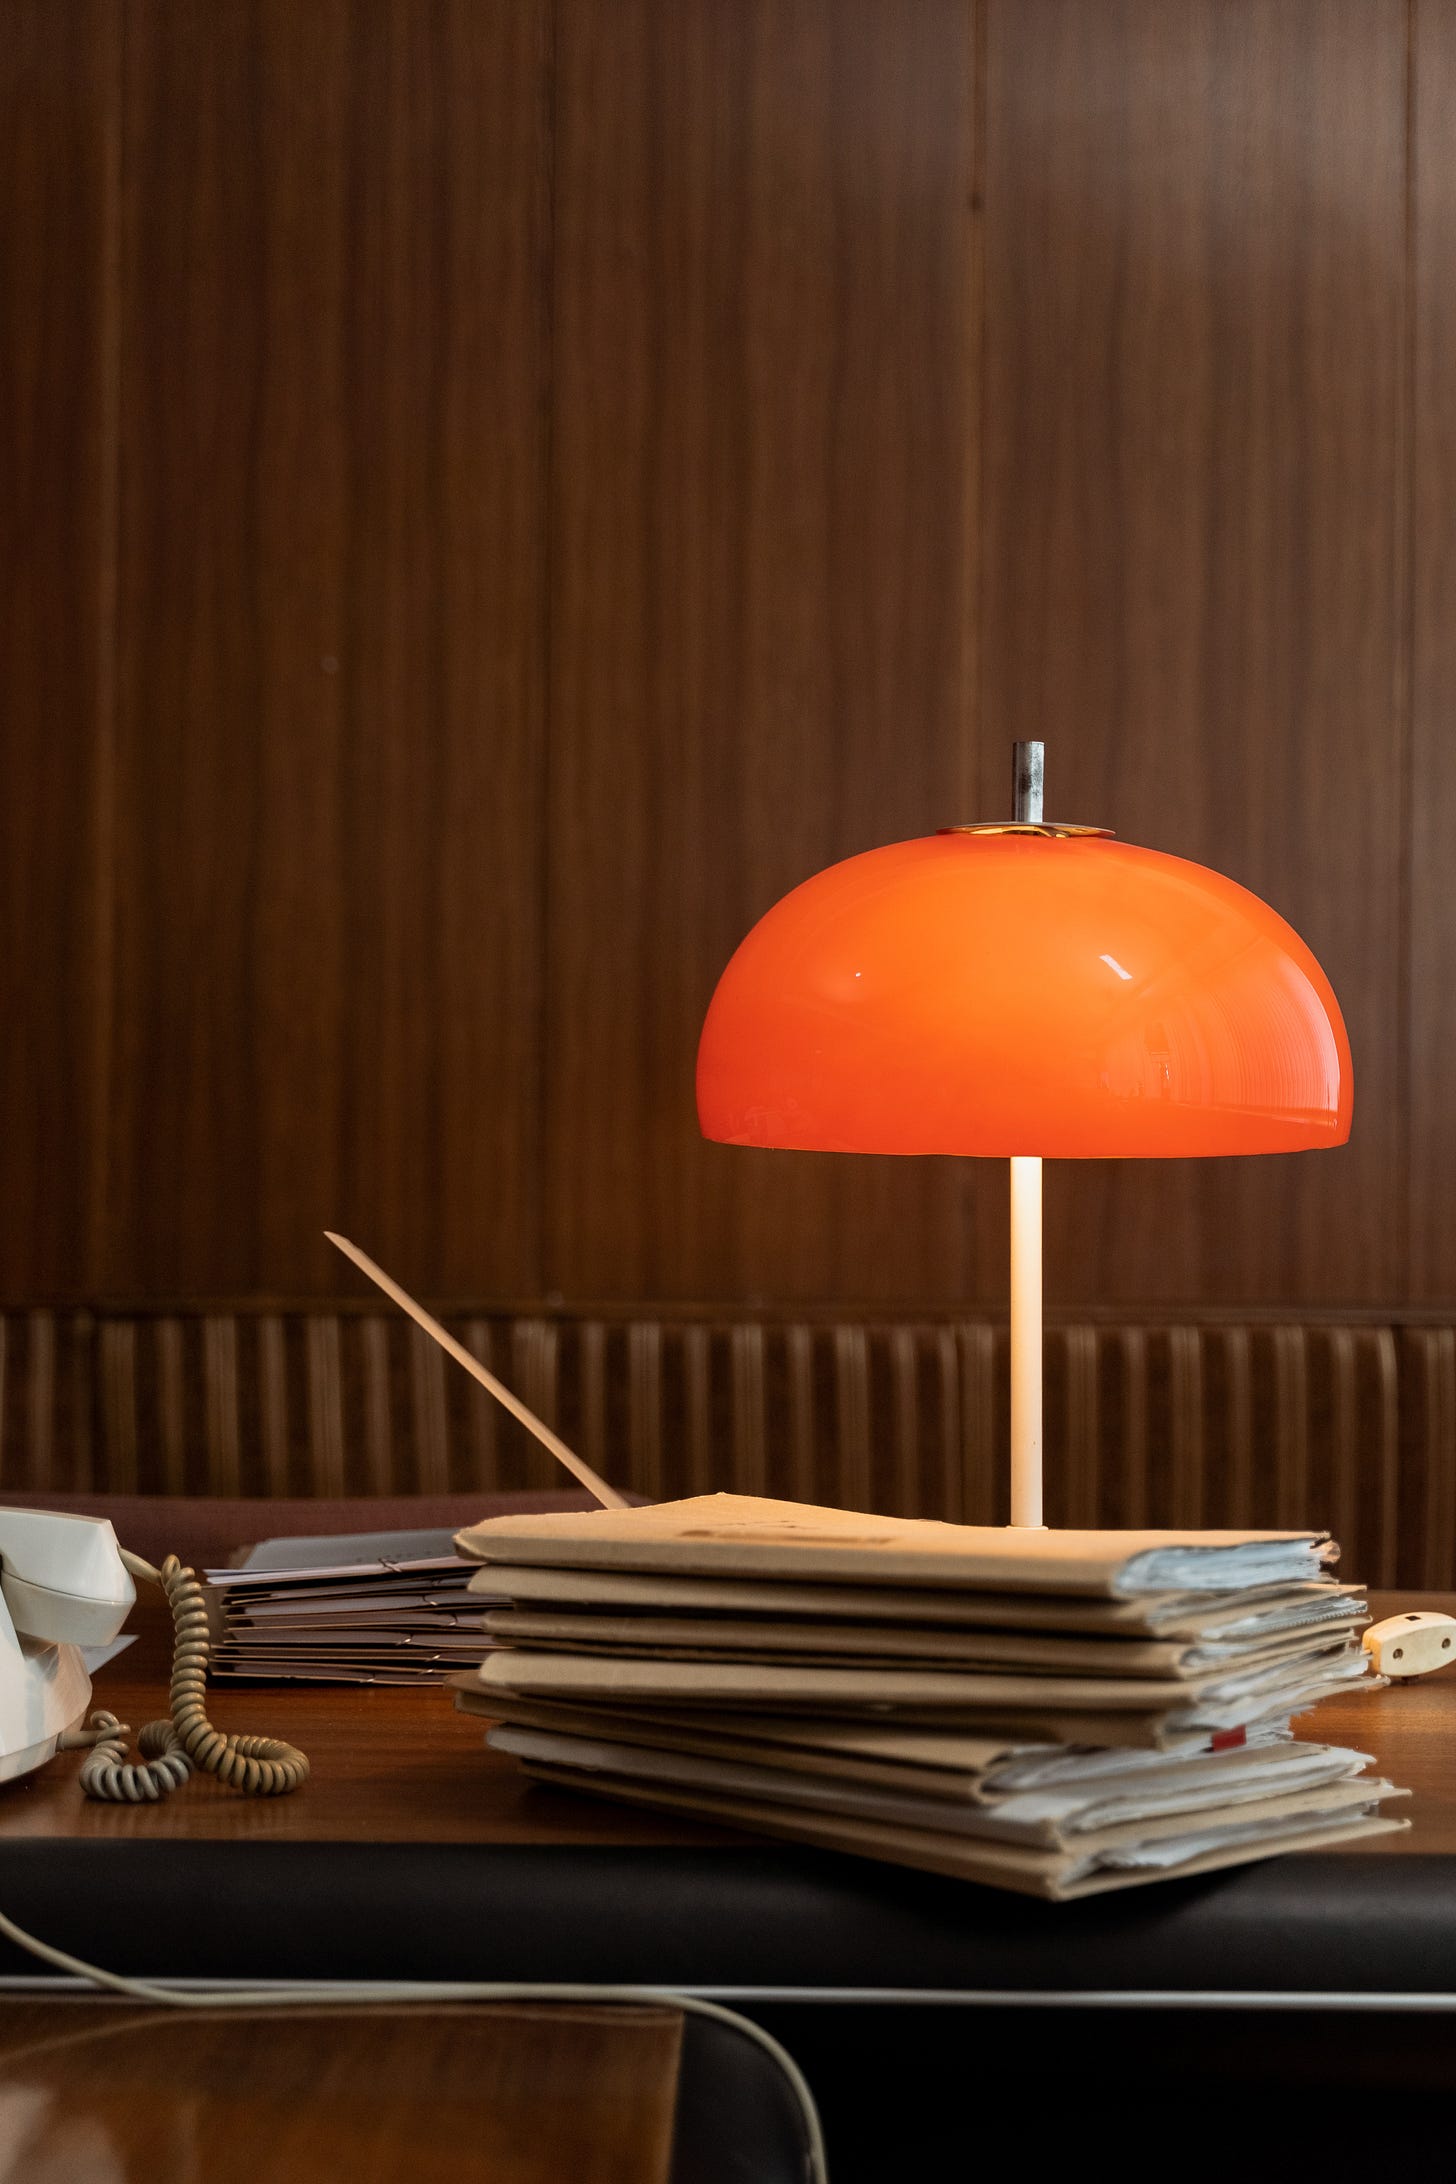 Medical files sit on a wooden desk with a bright orange lamp turned on, shining light on the table.